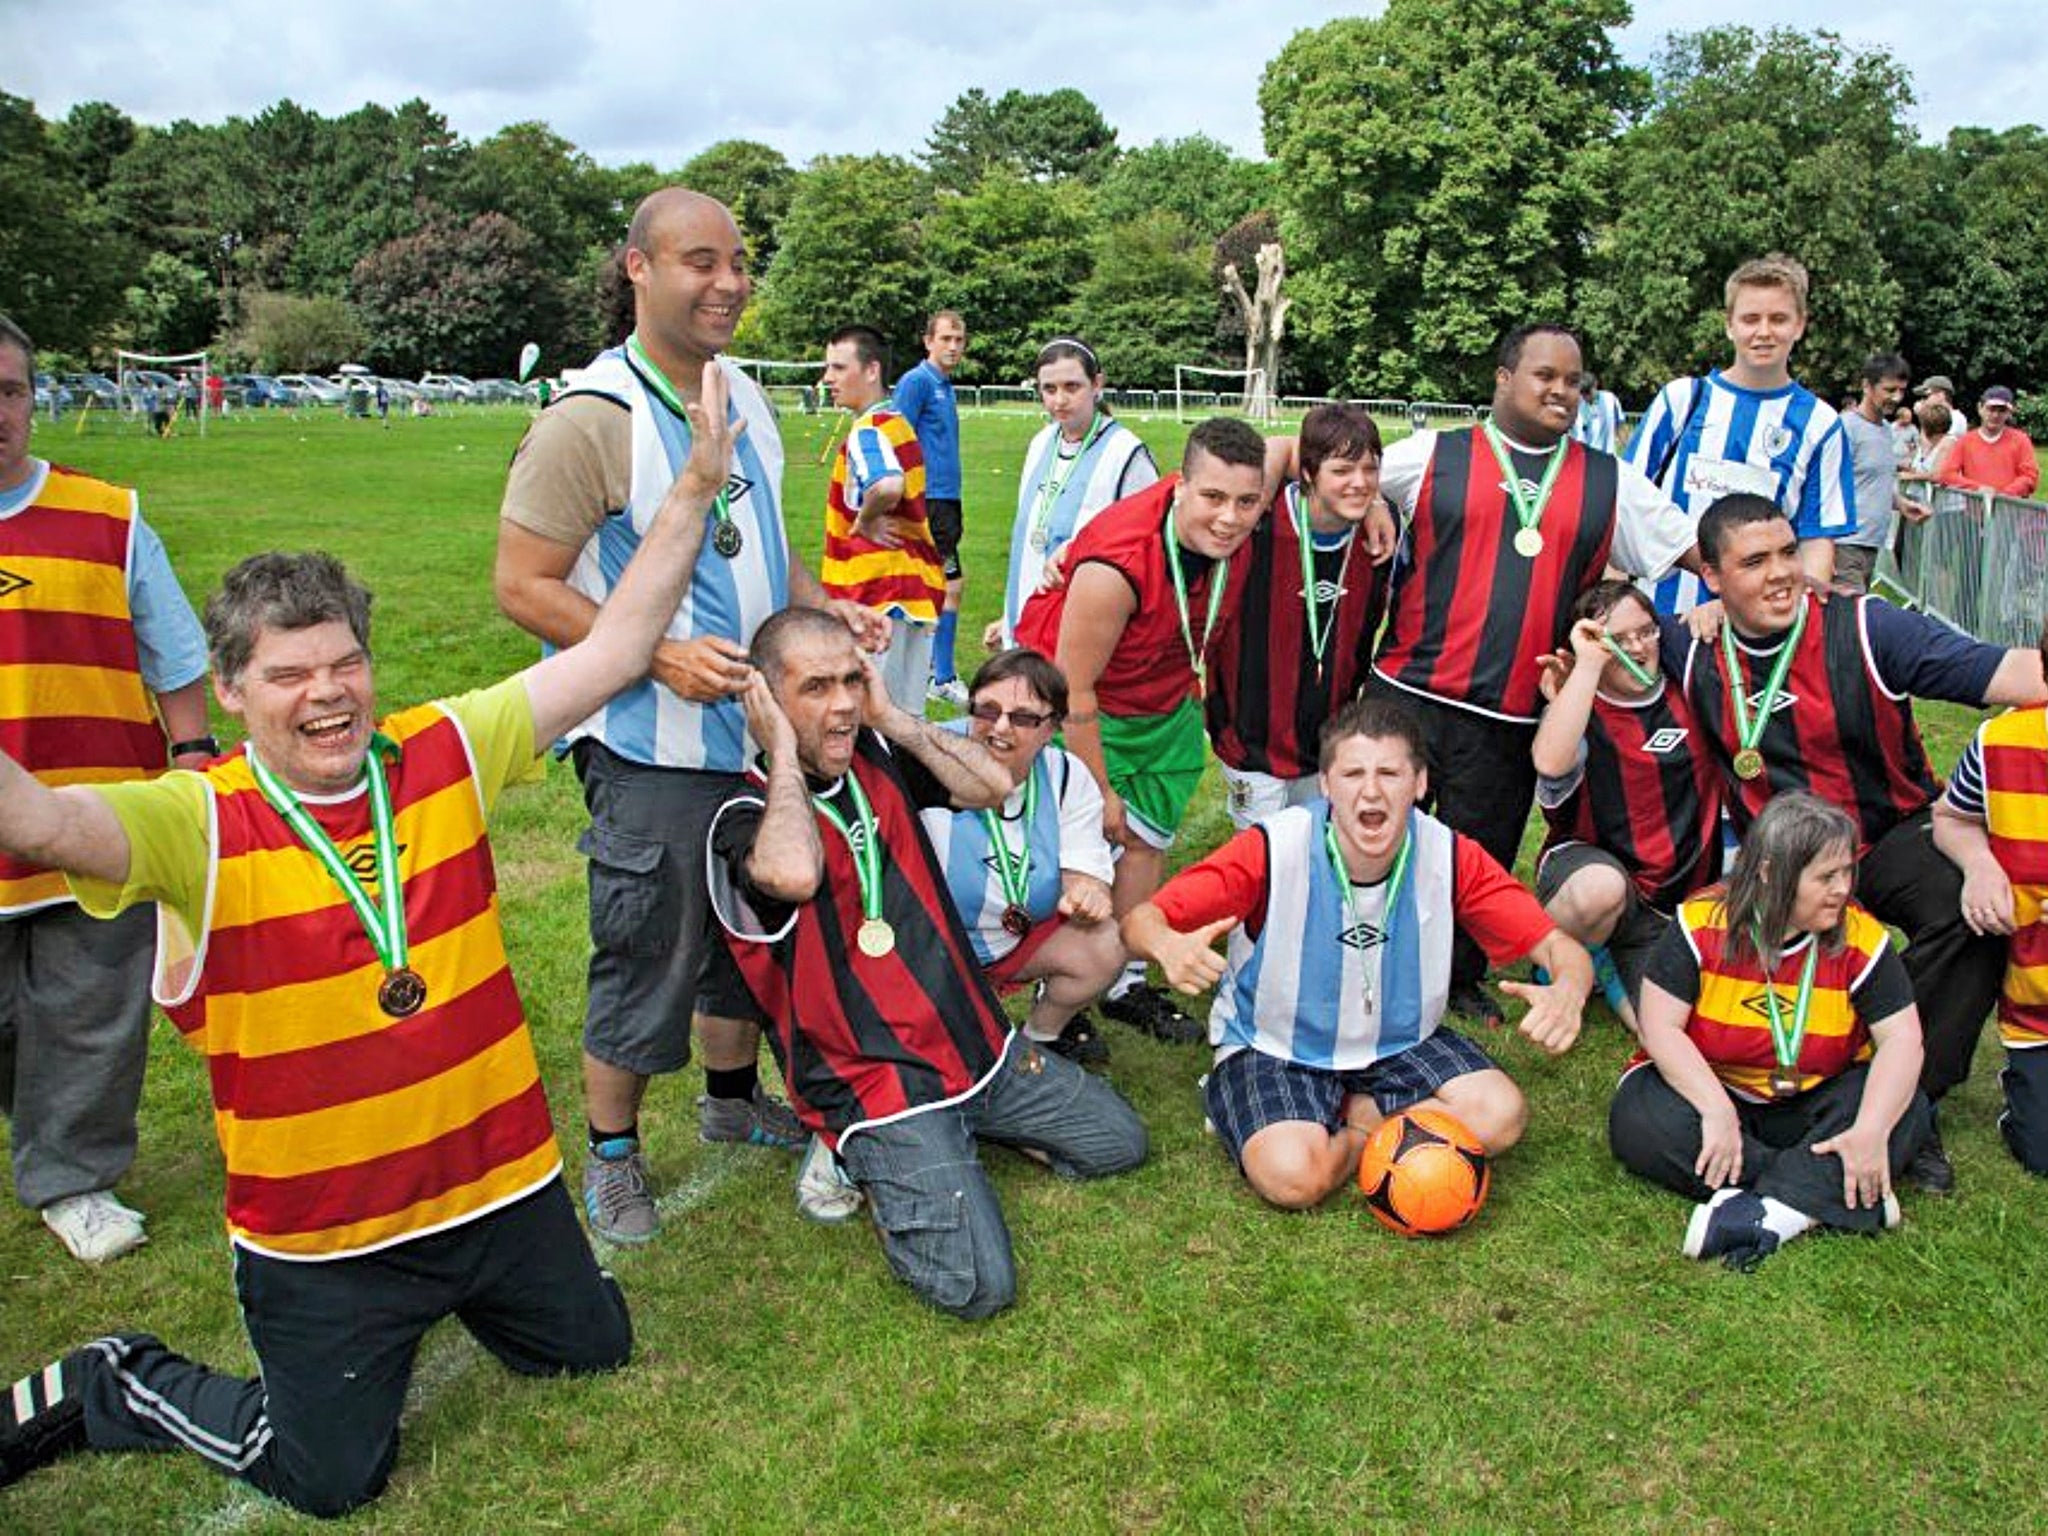 Medal-winners in the Wythenshawe Games in Greater Manchester